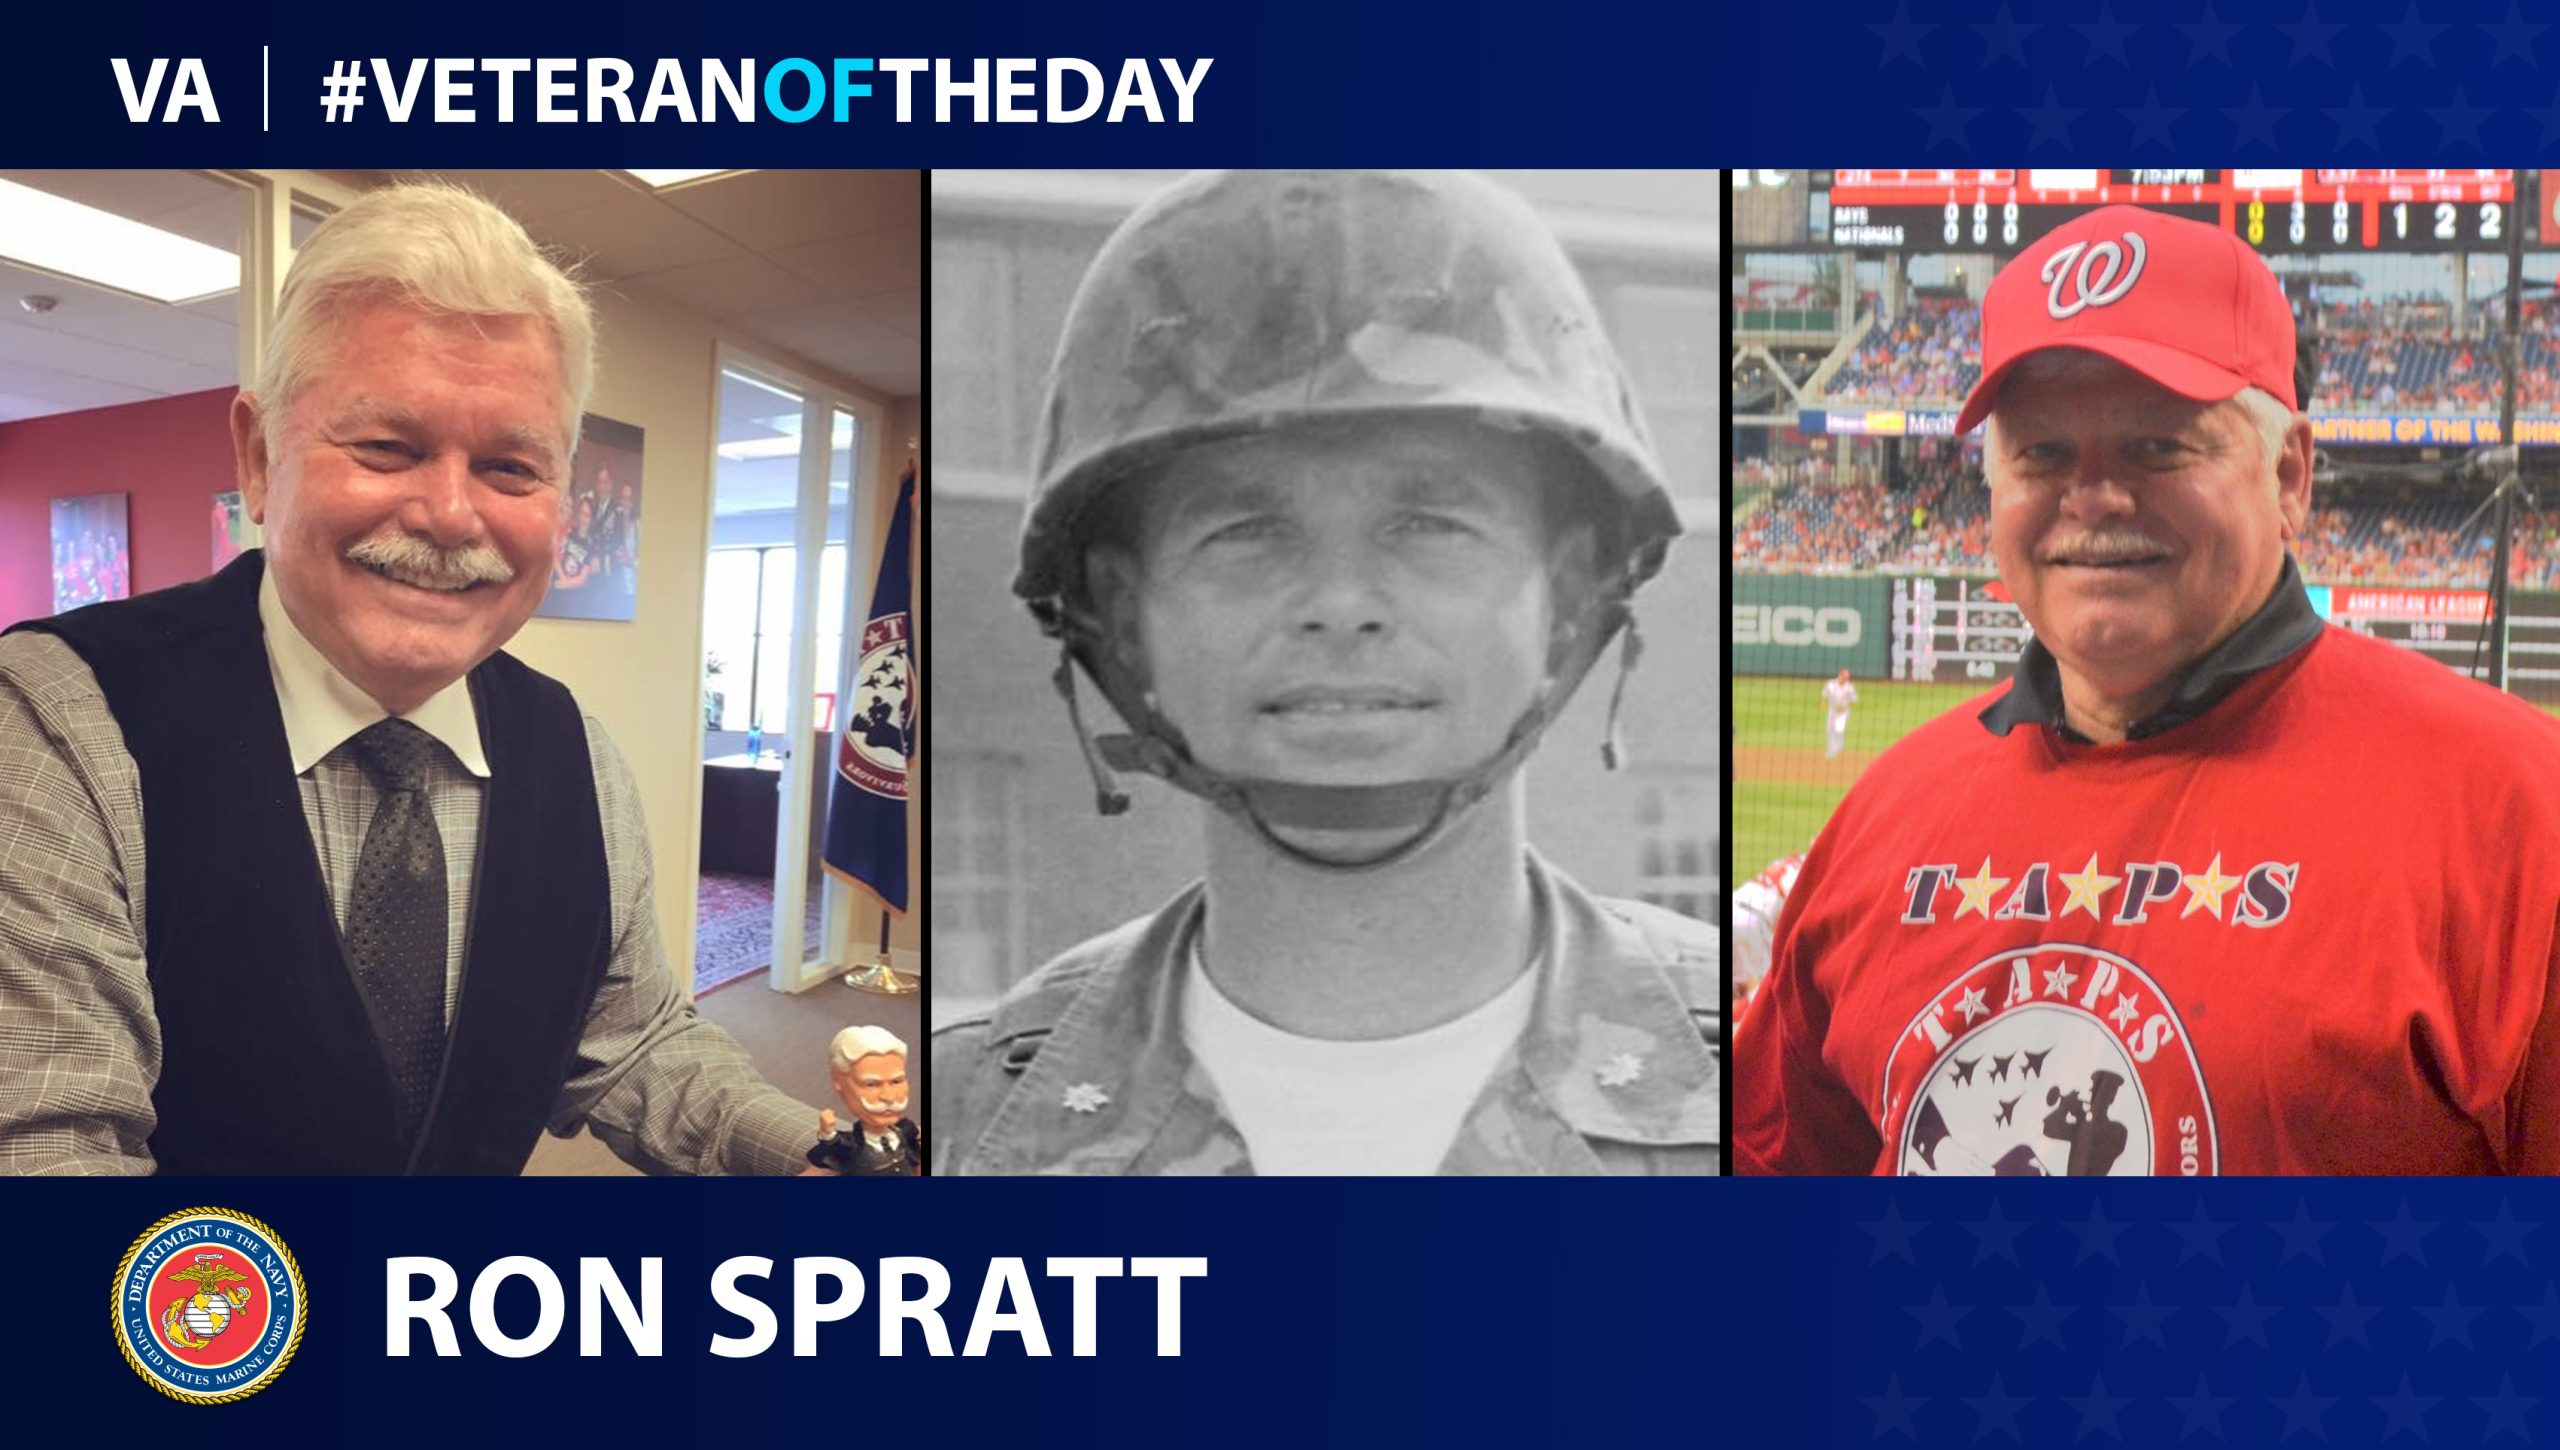 Today's #VeteranOfTheDay is Ronald E. Spratt, who served 20 years in the Marine Corps.